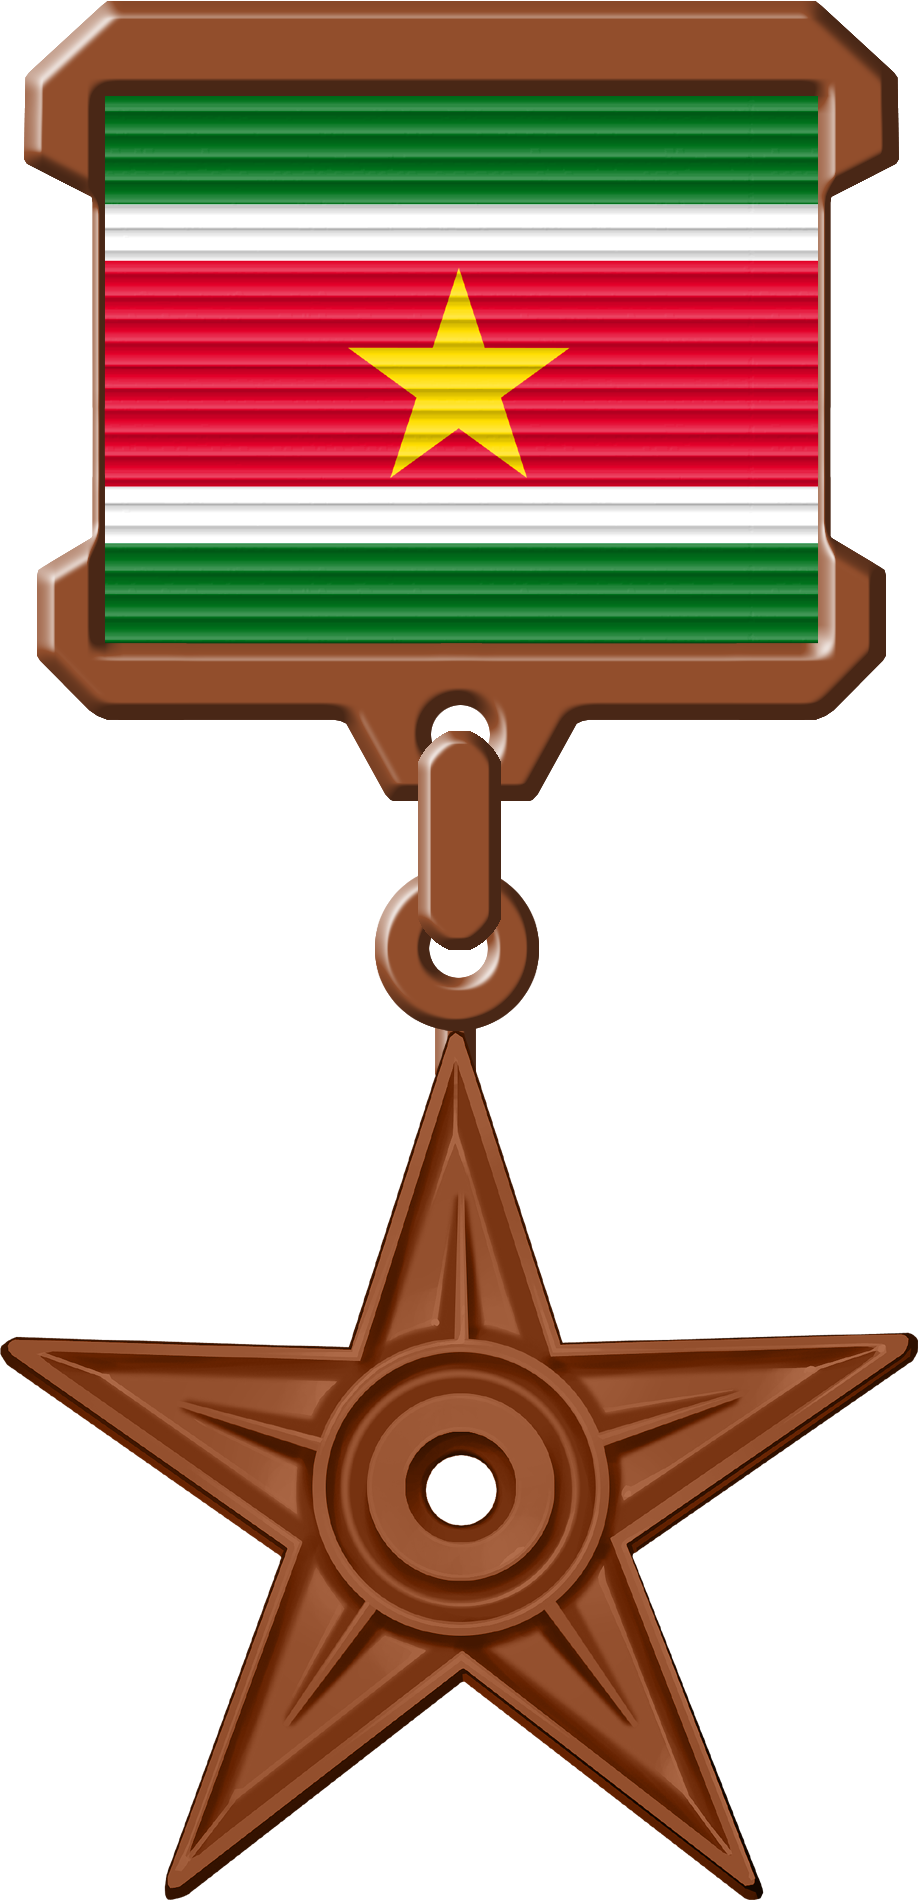 A Brown Star With A Green And White Flag On It